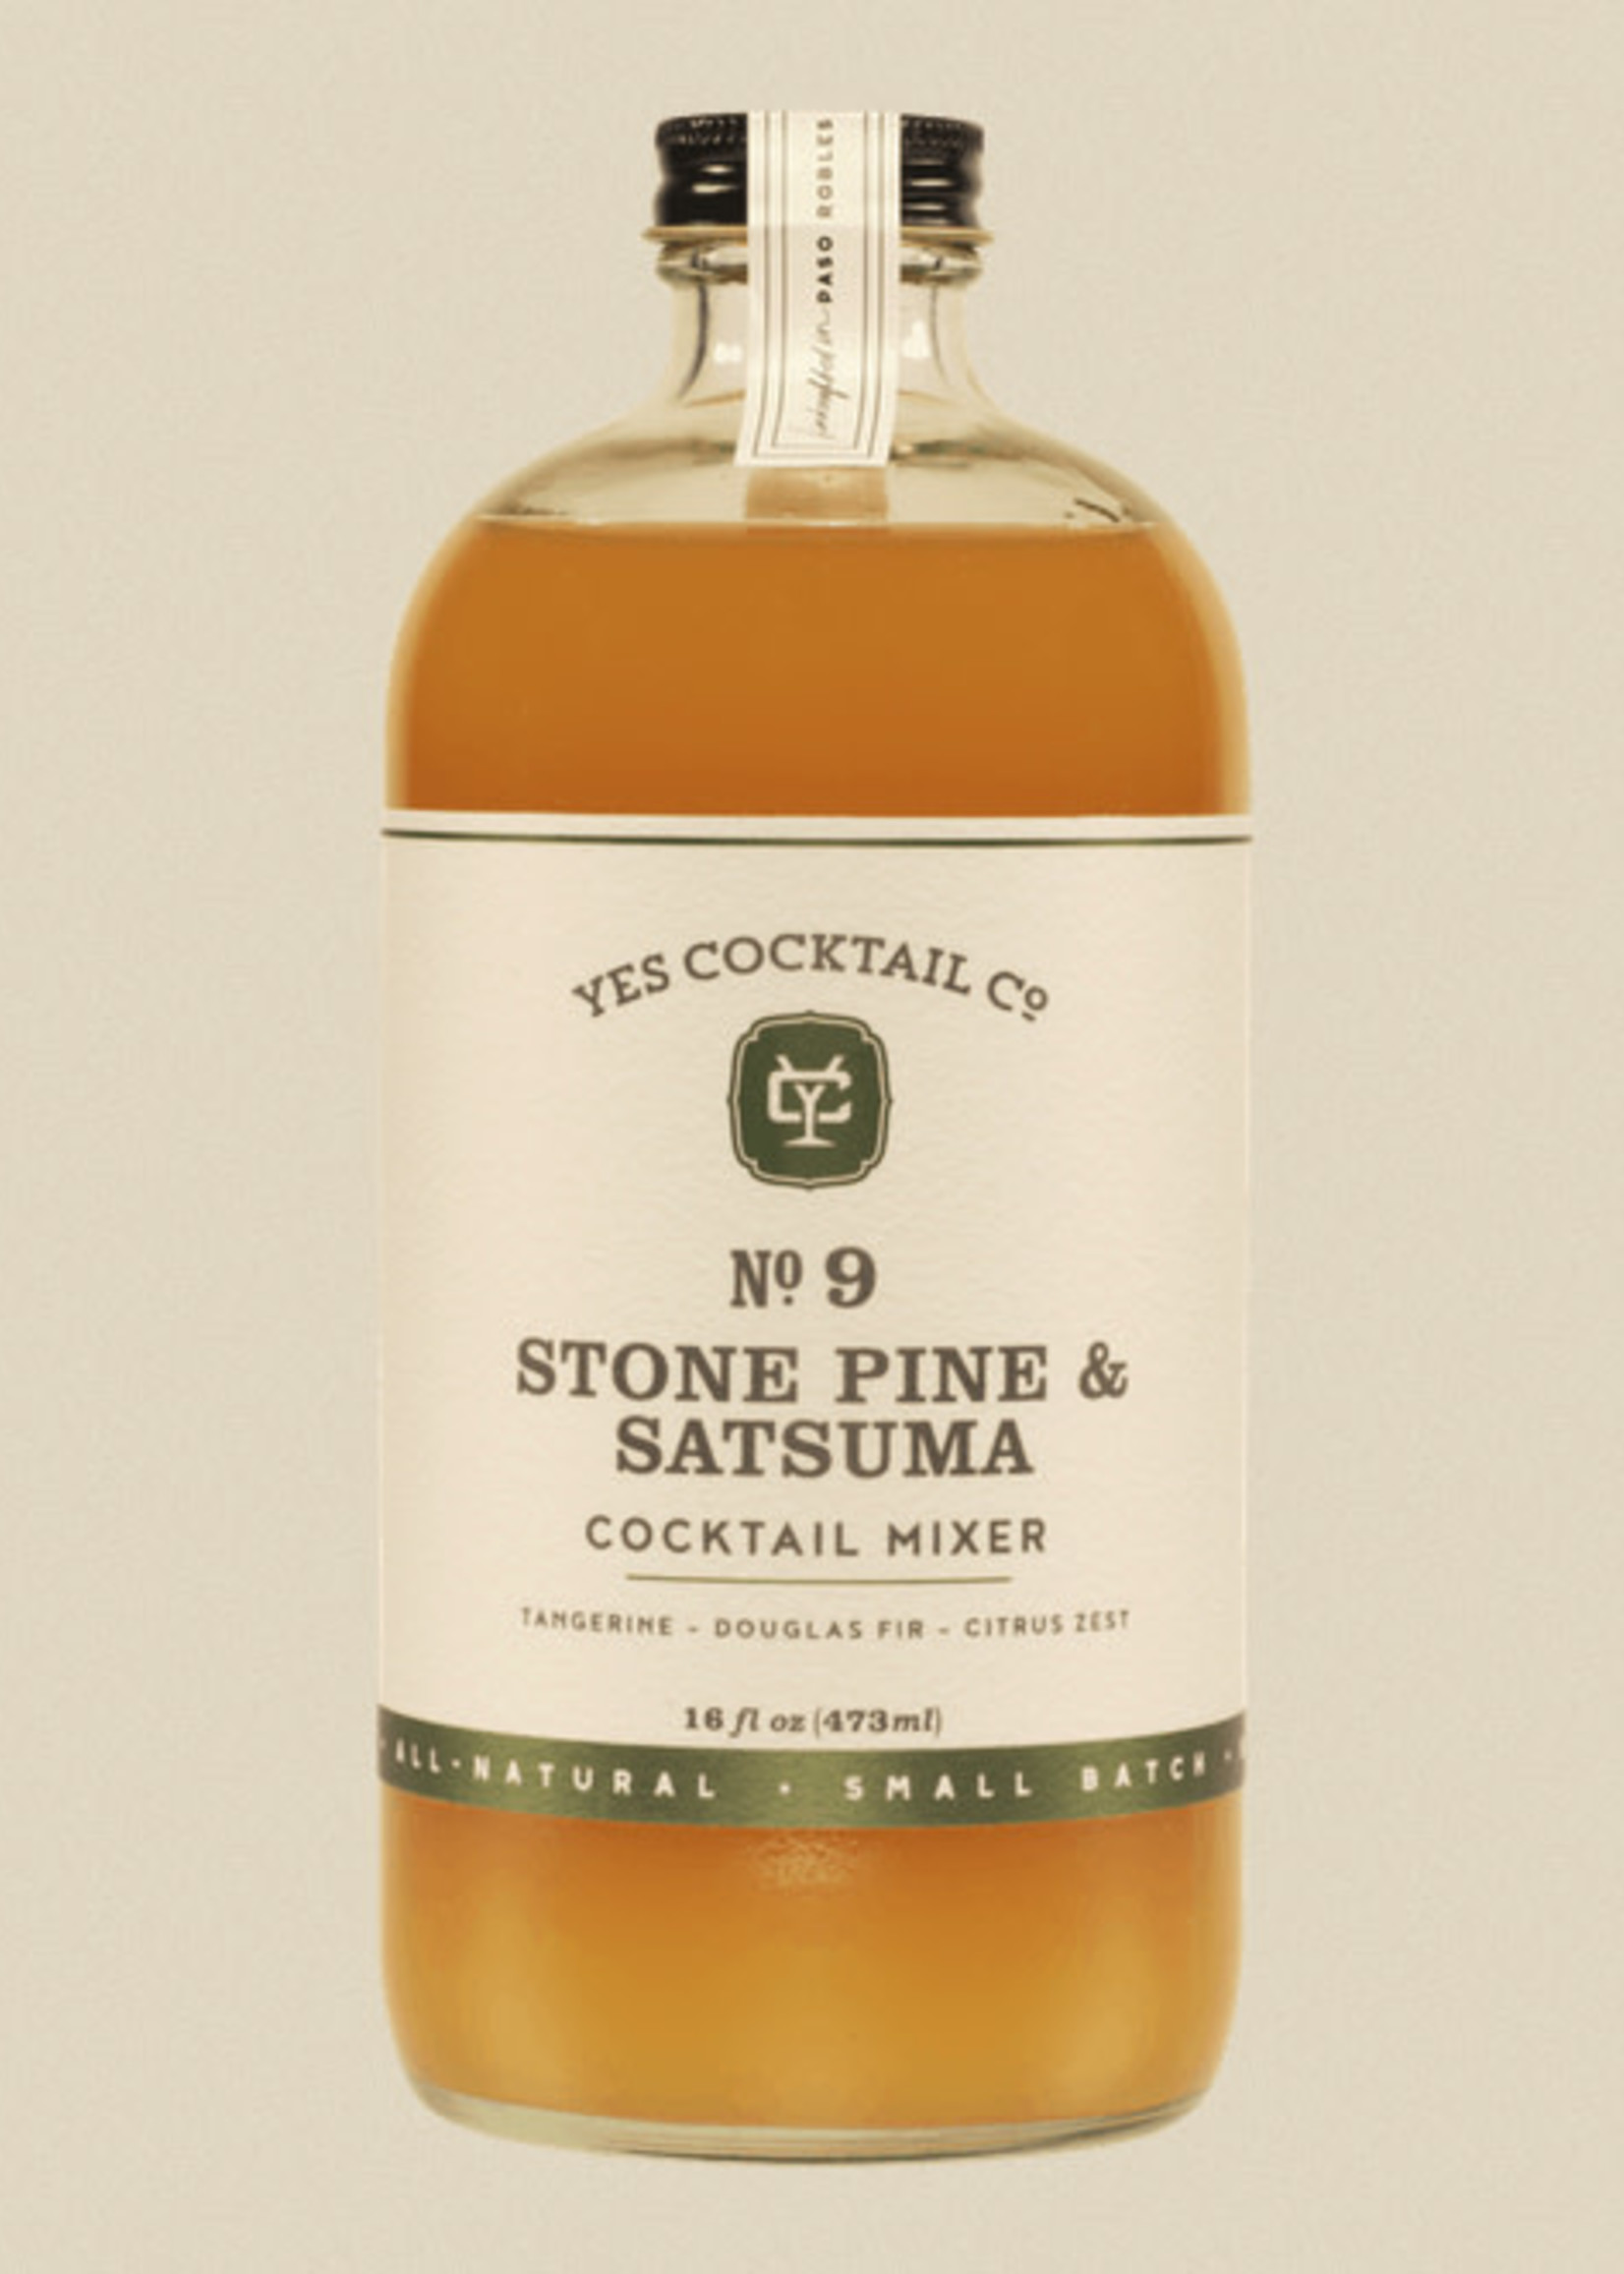 Yes Cocktail Co Yes Cocktail Co, No 9 Stone Pine and Satsuma Cocktail Mixer, 16oz